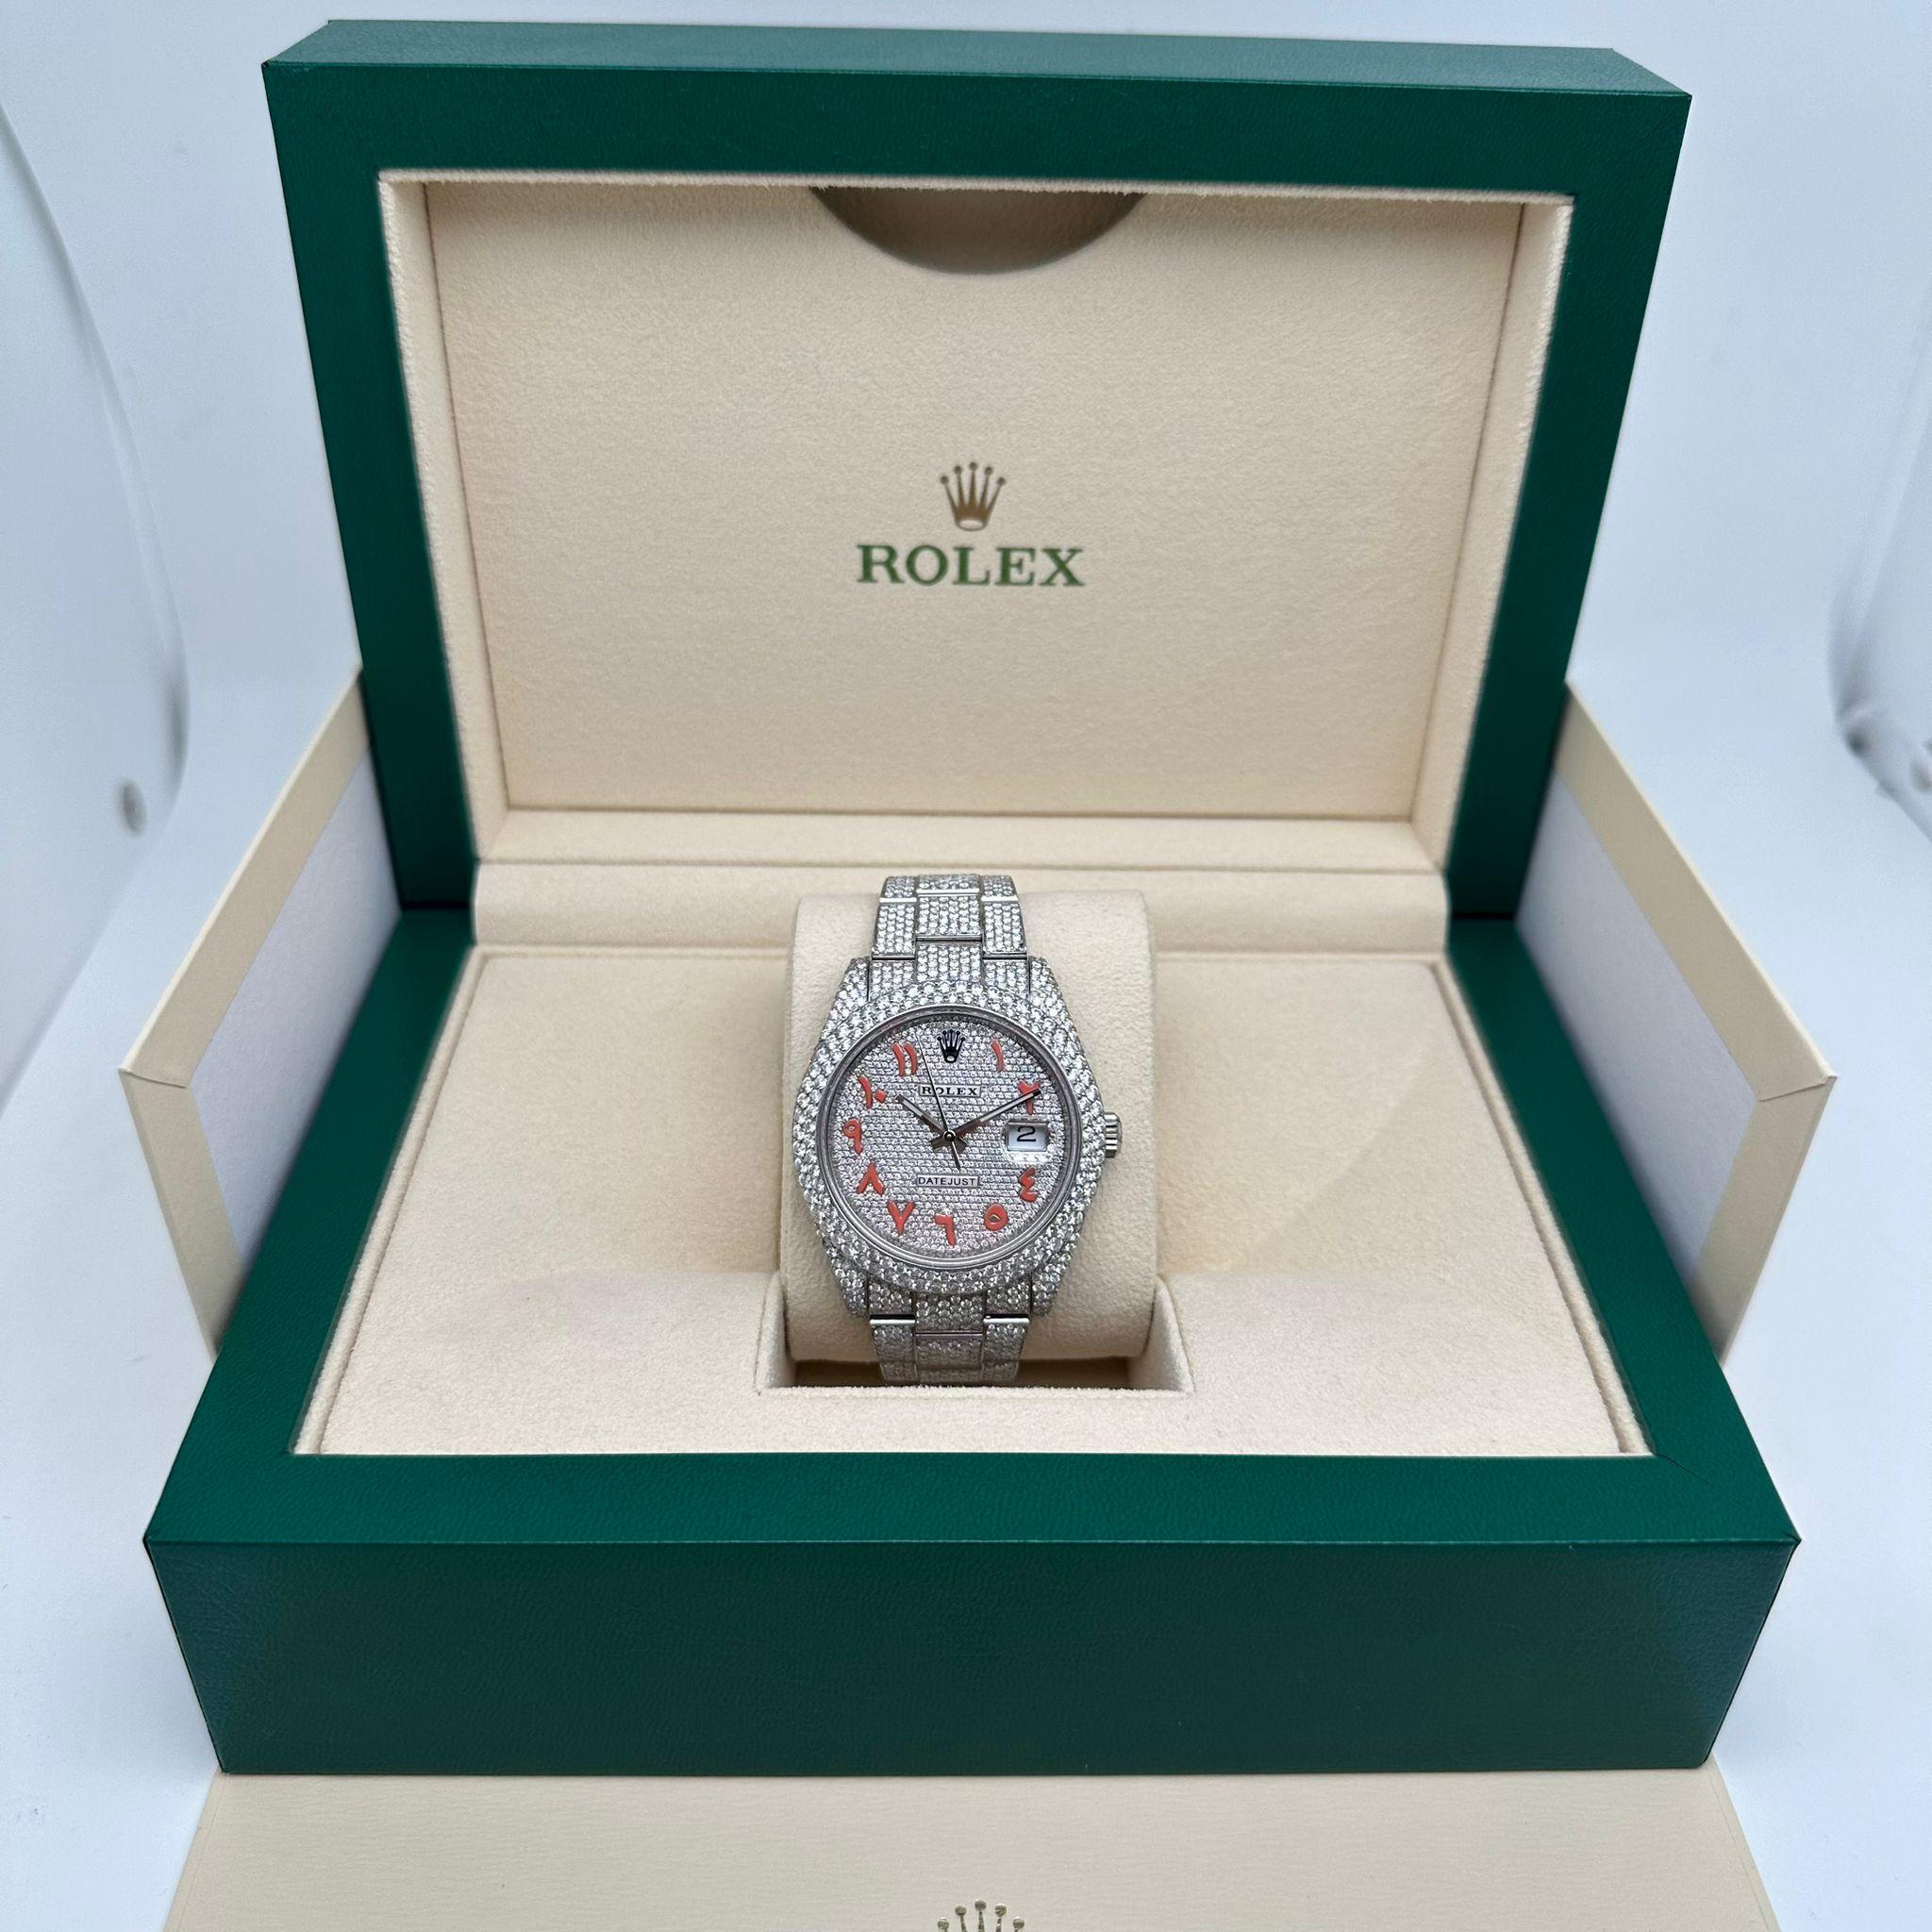 Custom diamonds totaling approximately 20.08cttw  Color: G-H  Clarity: VS-SI. Covered by a 3-year warranty.


General Information
Brand: Rolex
Model Number: 126300
Model: Rolex Datejust 126300
Type: Wristwatch
Department: Men
Style: Luxury
Vintage: